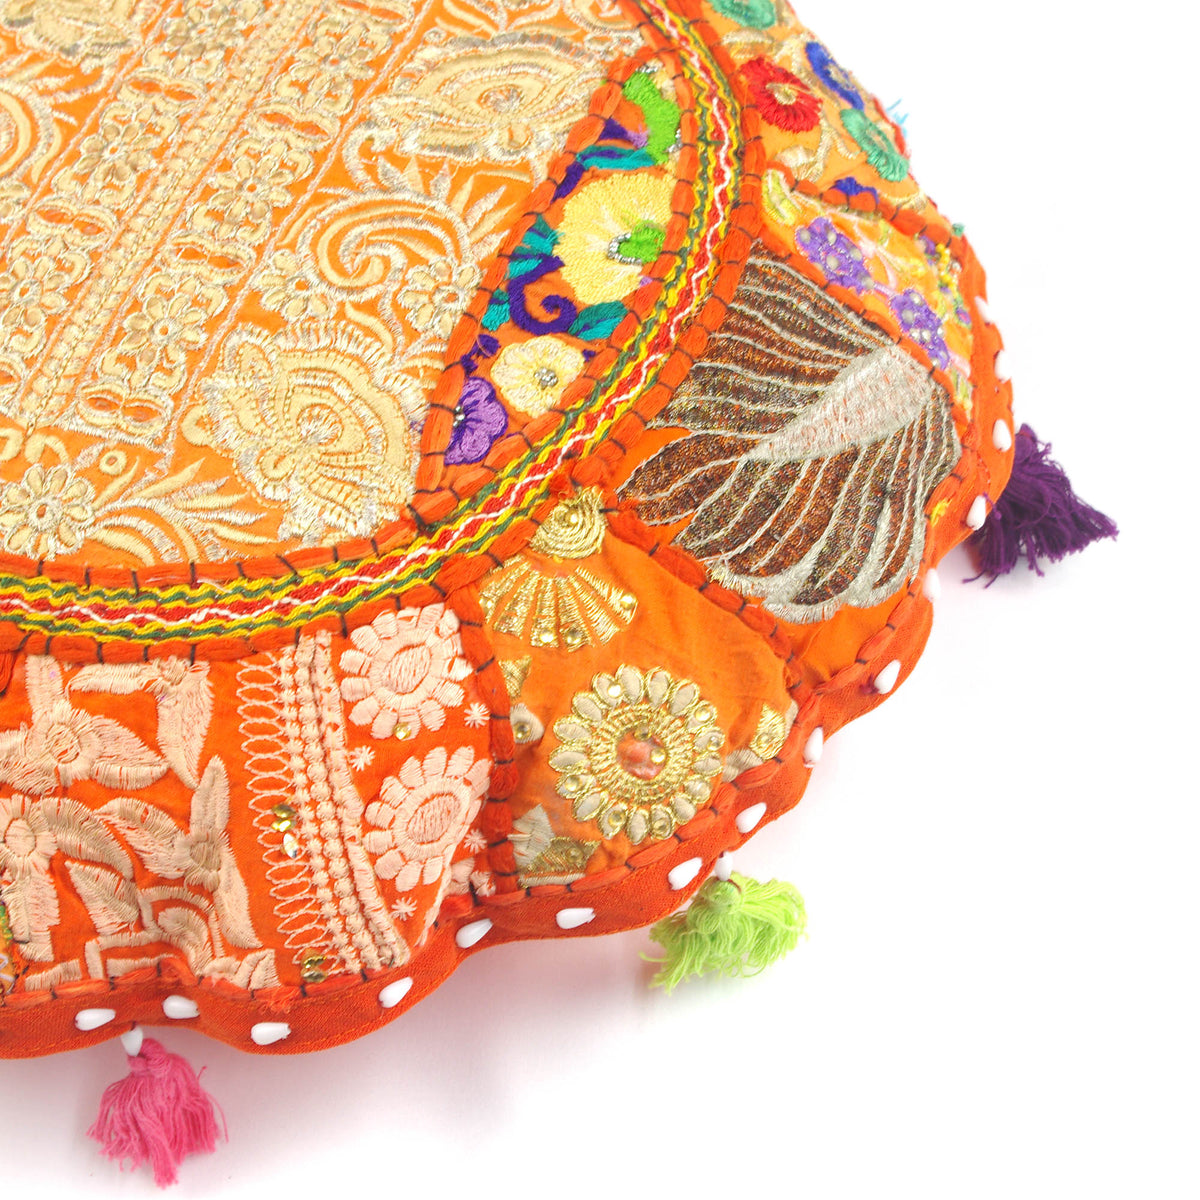 Orange Round Floor Embroidered Patchwork Pouf Ottoman Indian Vintage Cushion Cover 18"